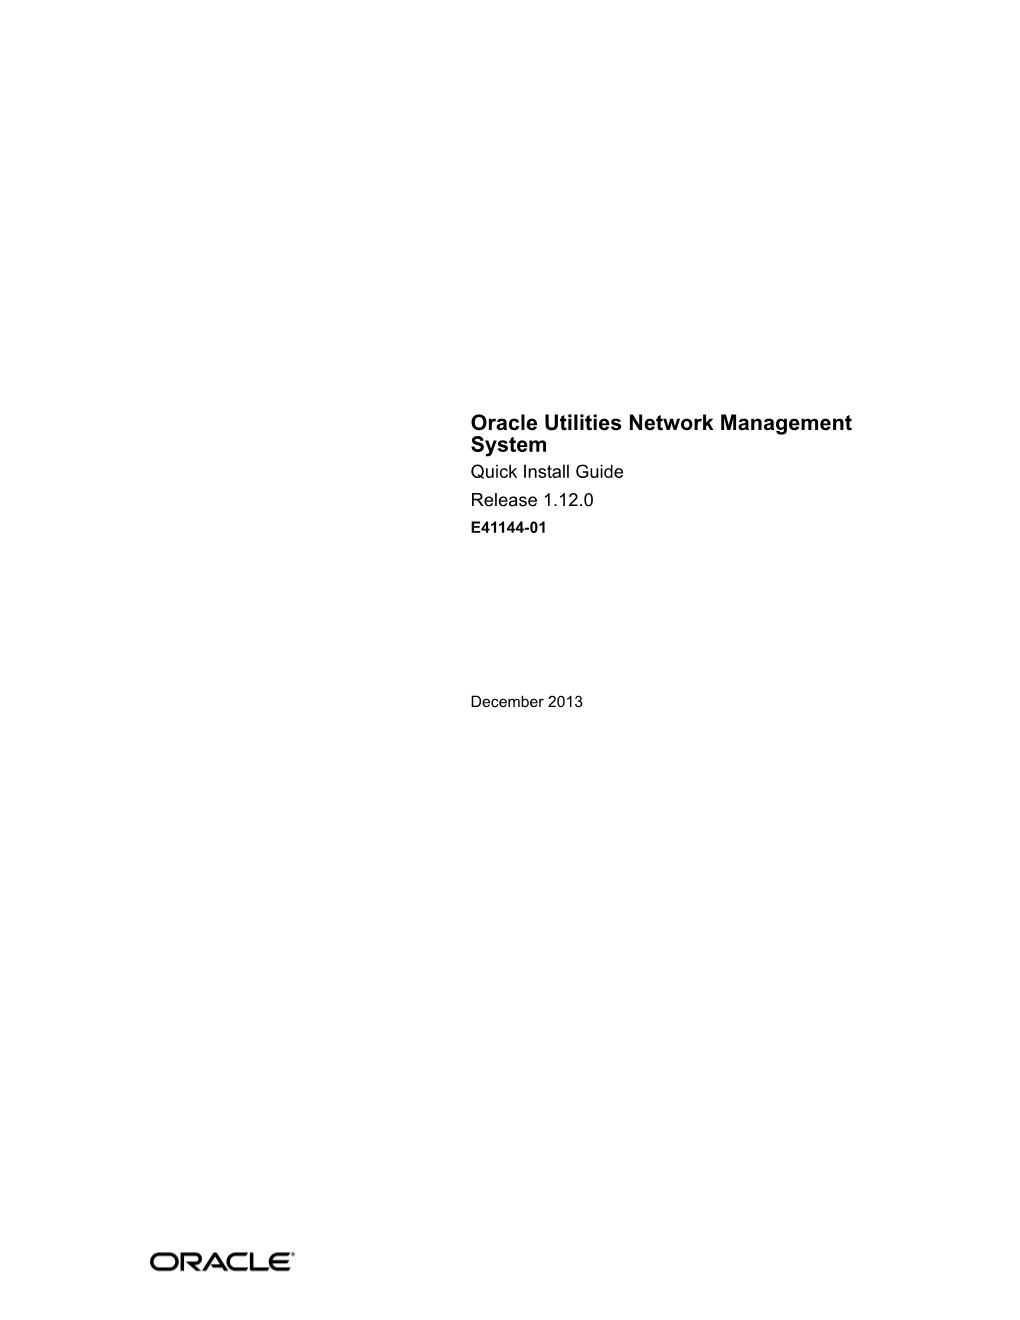 Oracle Utilities Network Management System Quick Install Guide Release 1.12.0 E41144-01